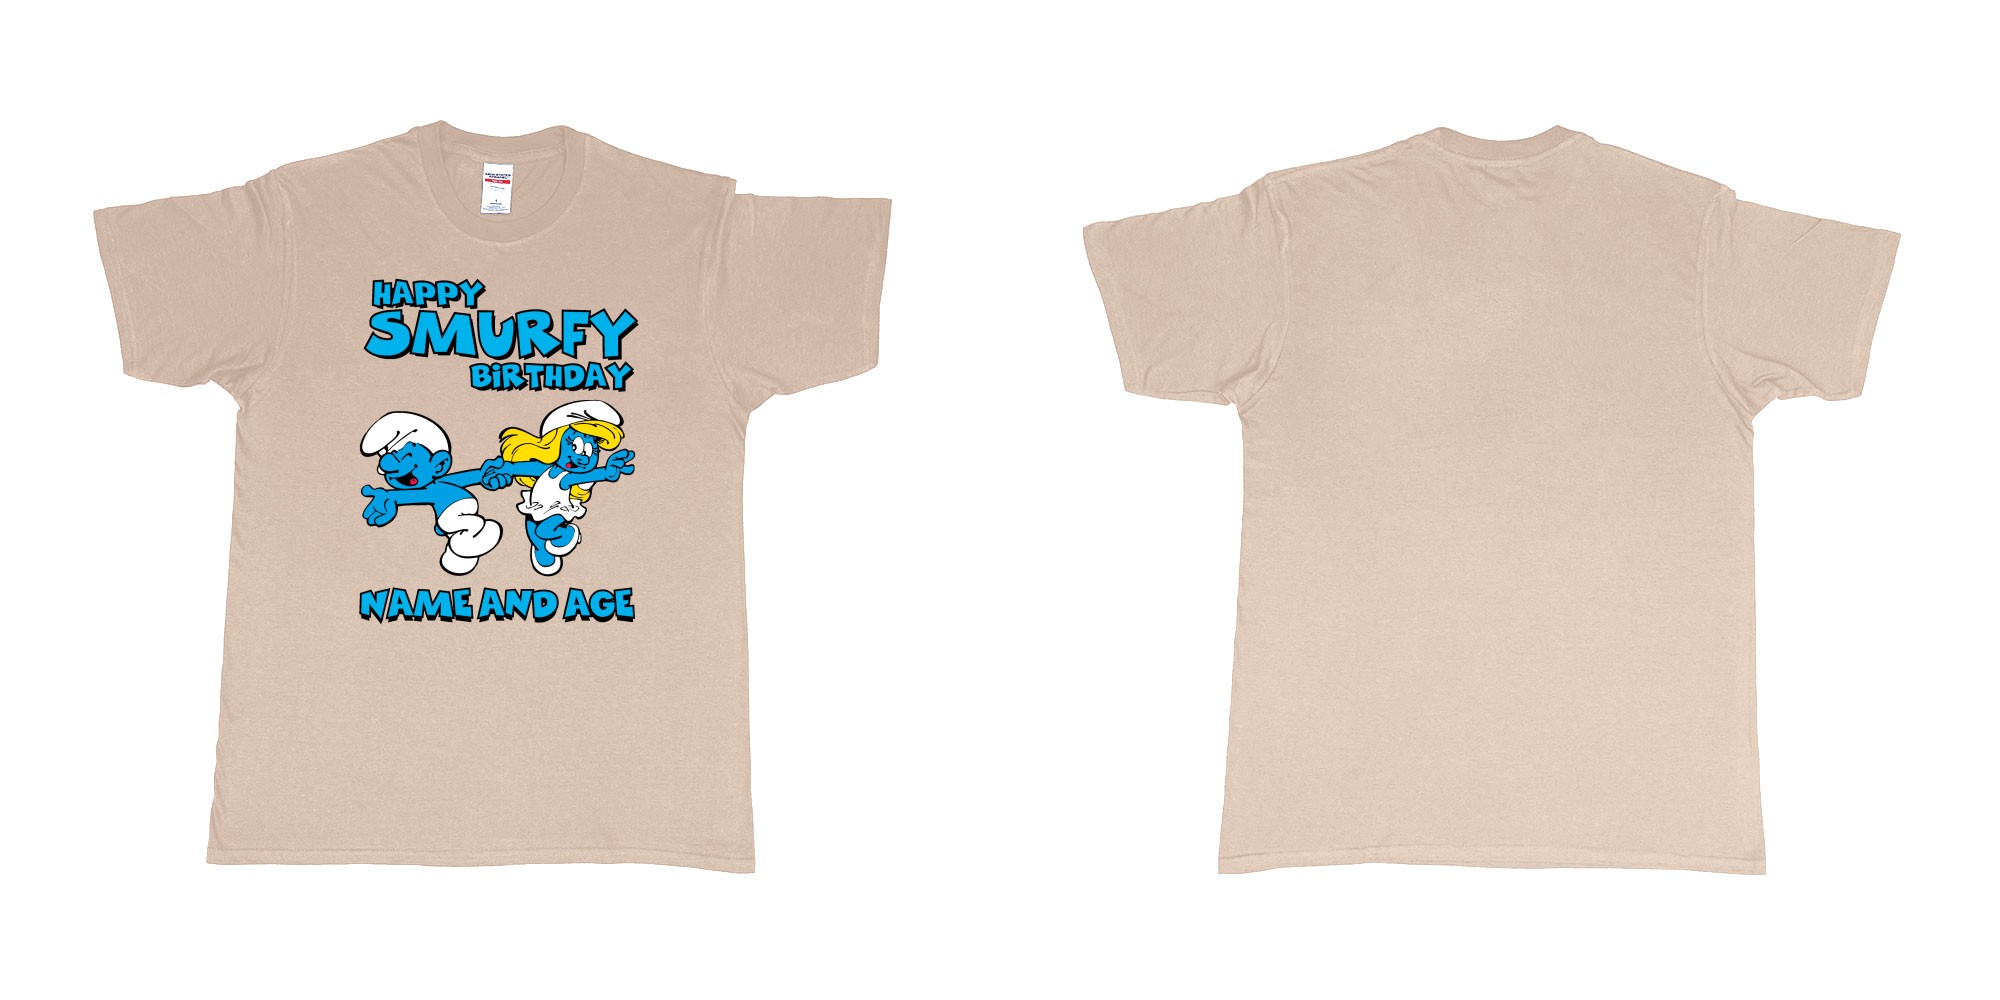 Custom tshirt design happy smurfy birthday in fabric color sand choice your own text made in Bali by The Pirate Way